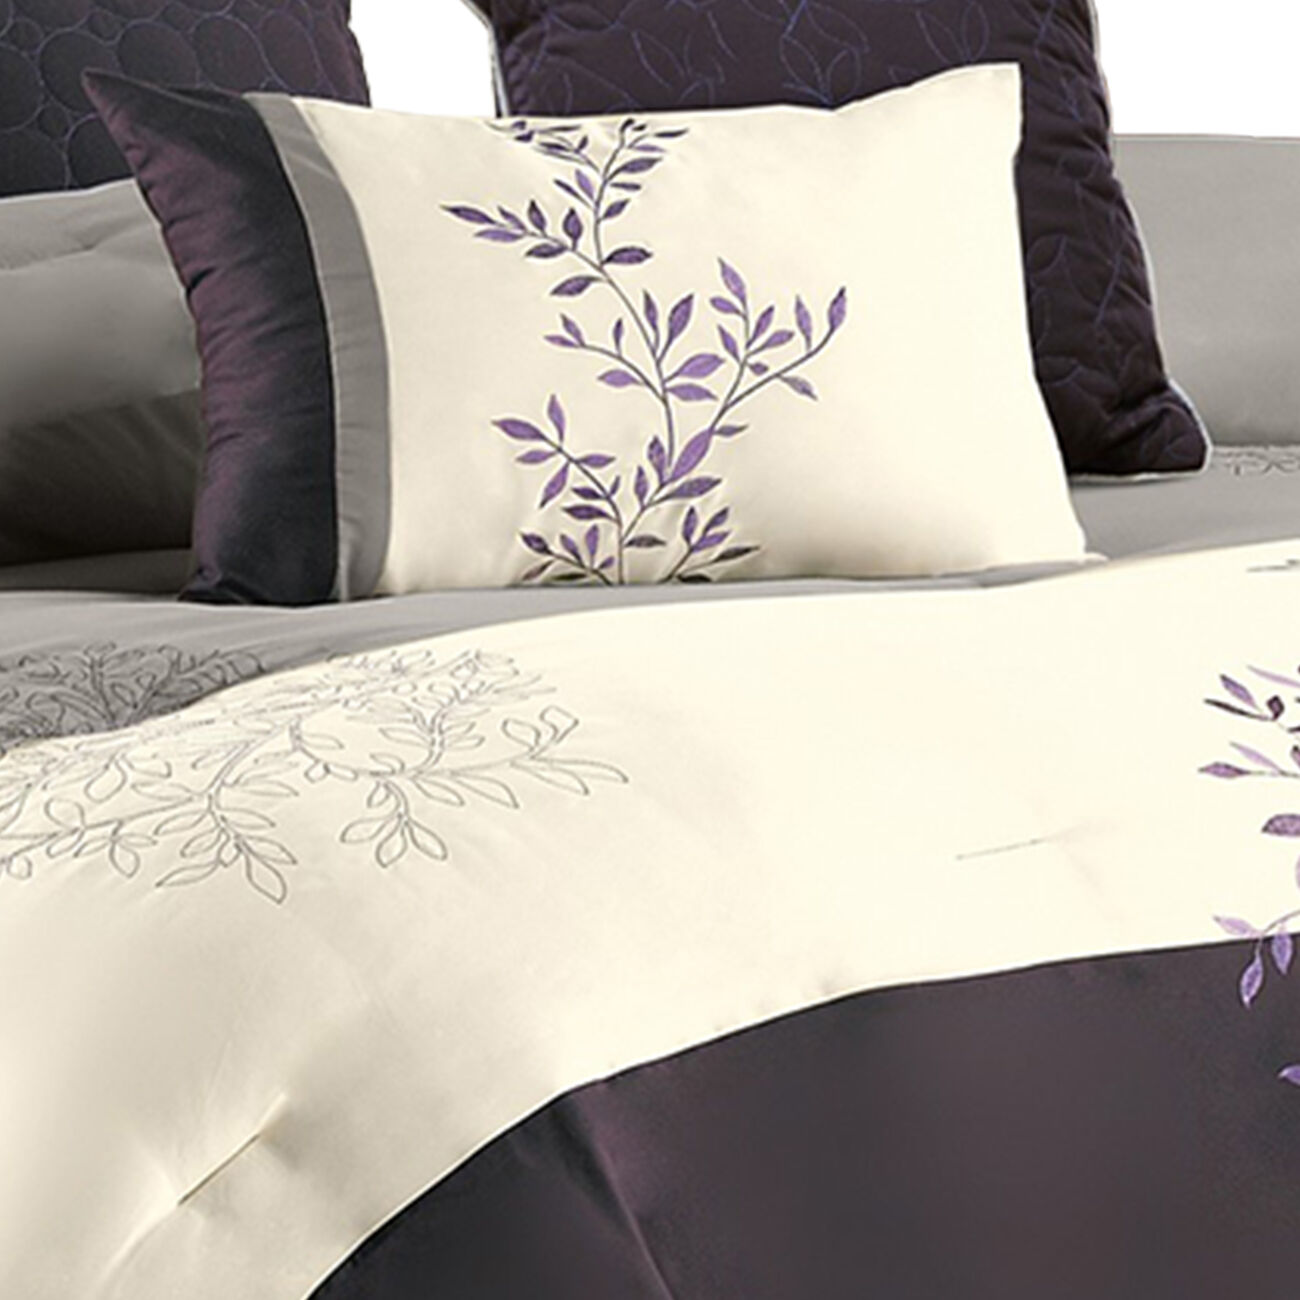 7 Piece Queen Polyester Comforter Set with Leaf Embroidery, Gray and Purple